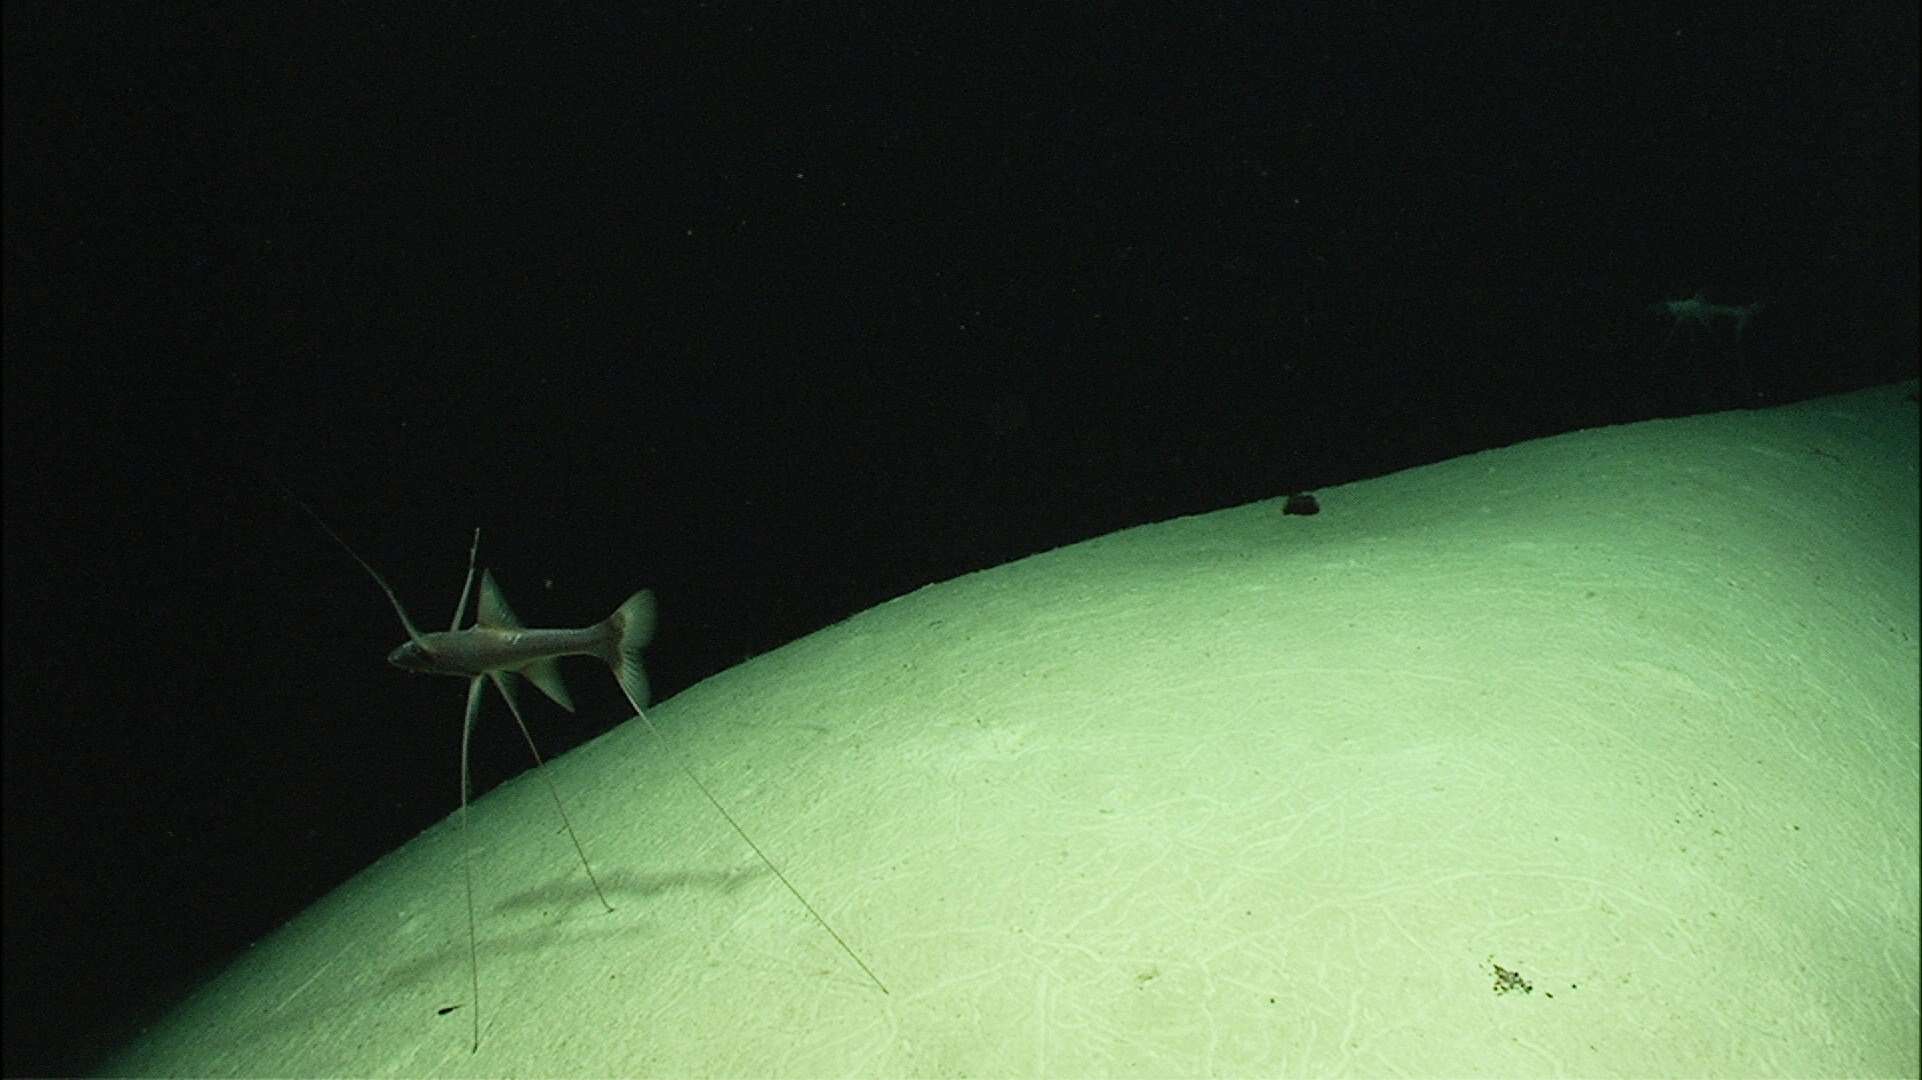 Image of spiderfishes